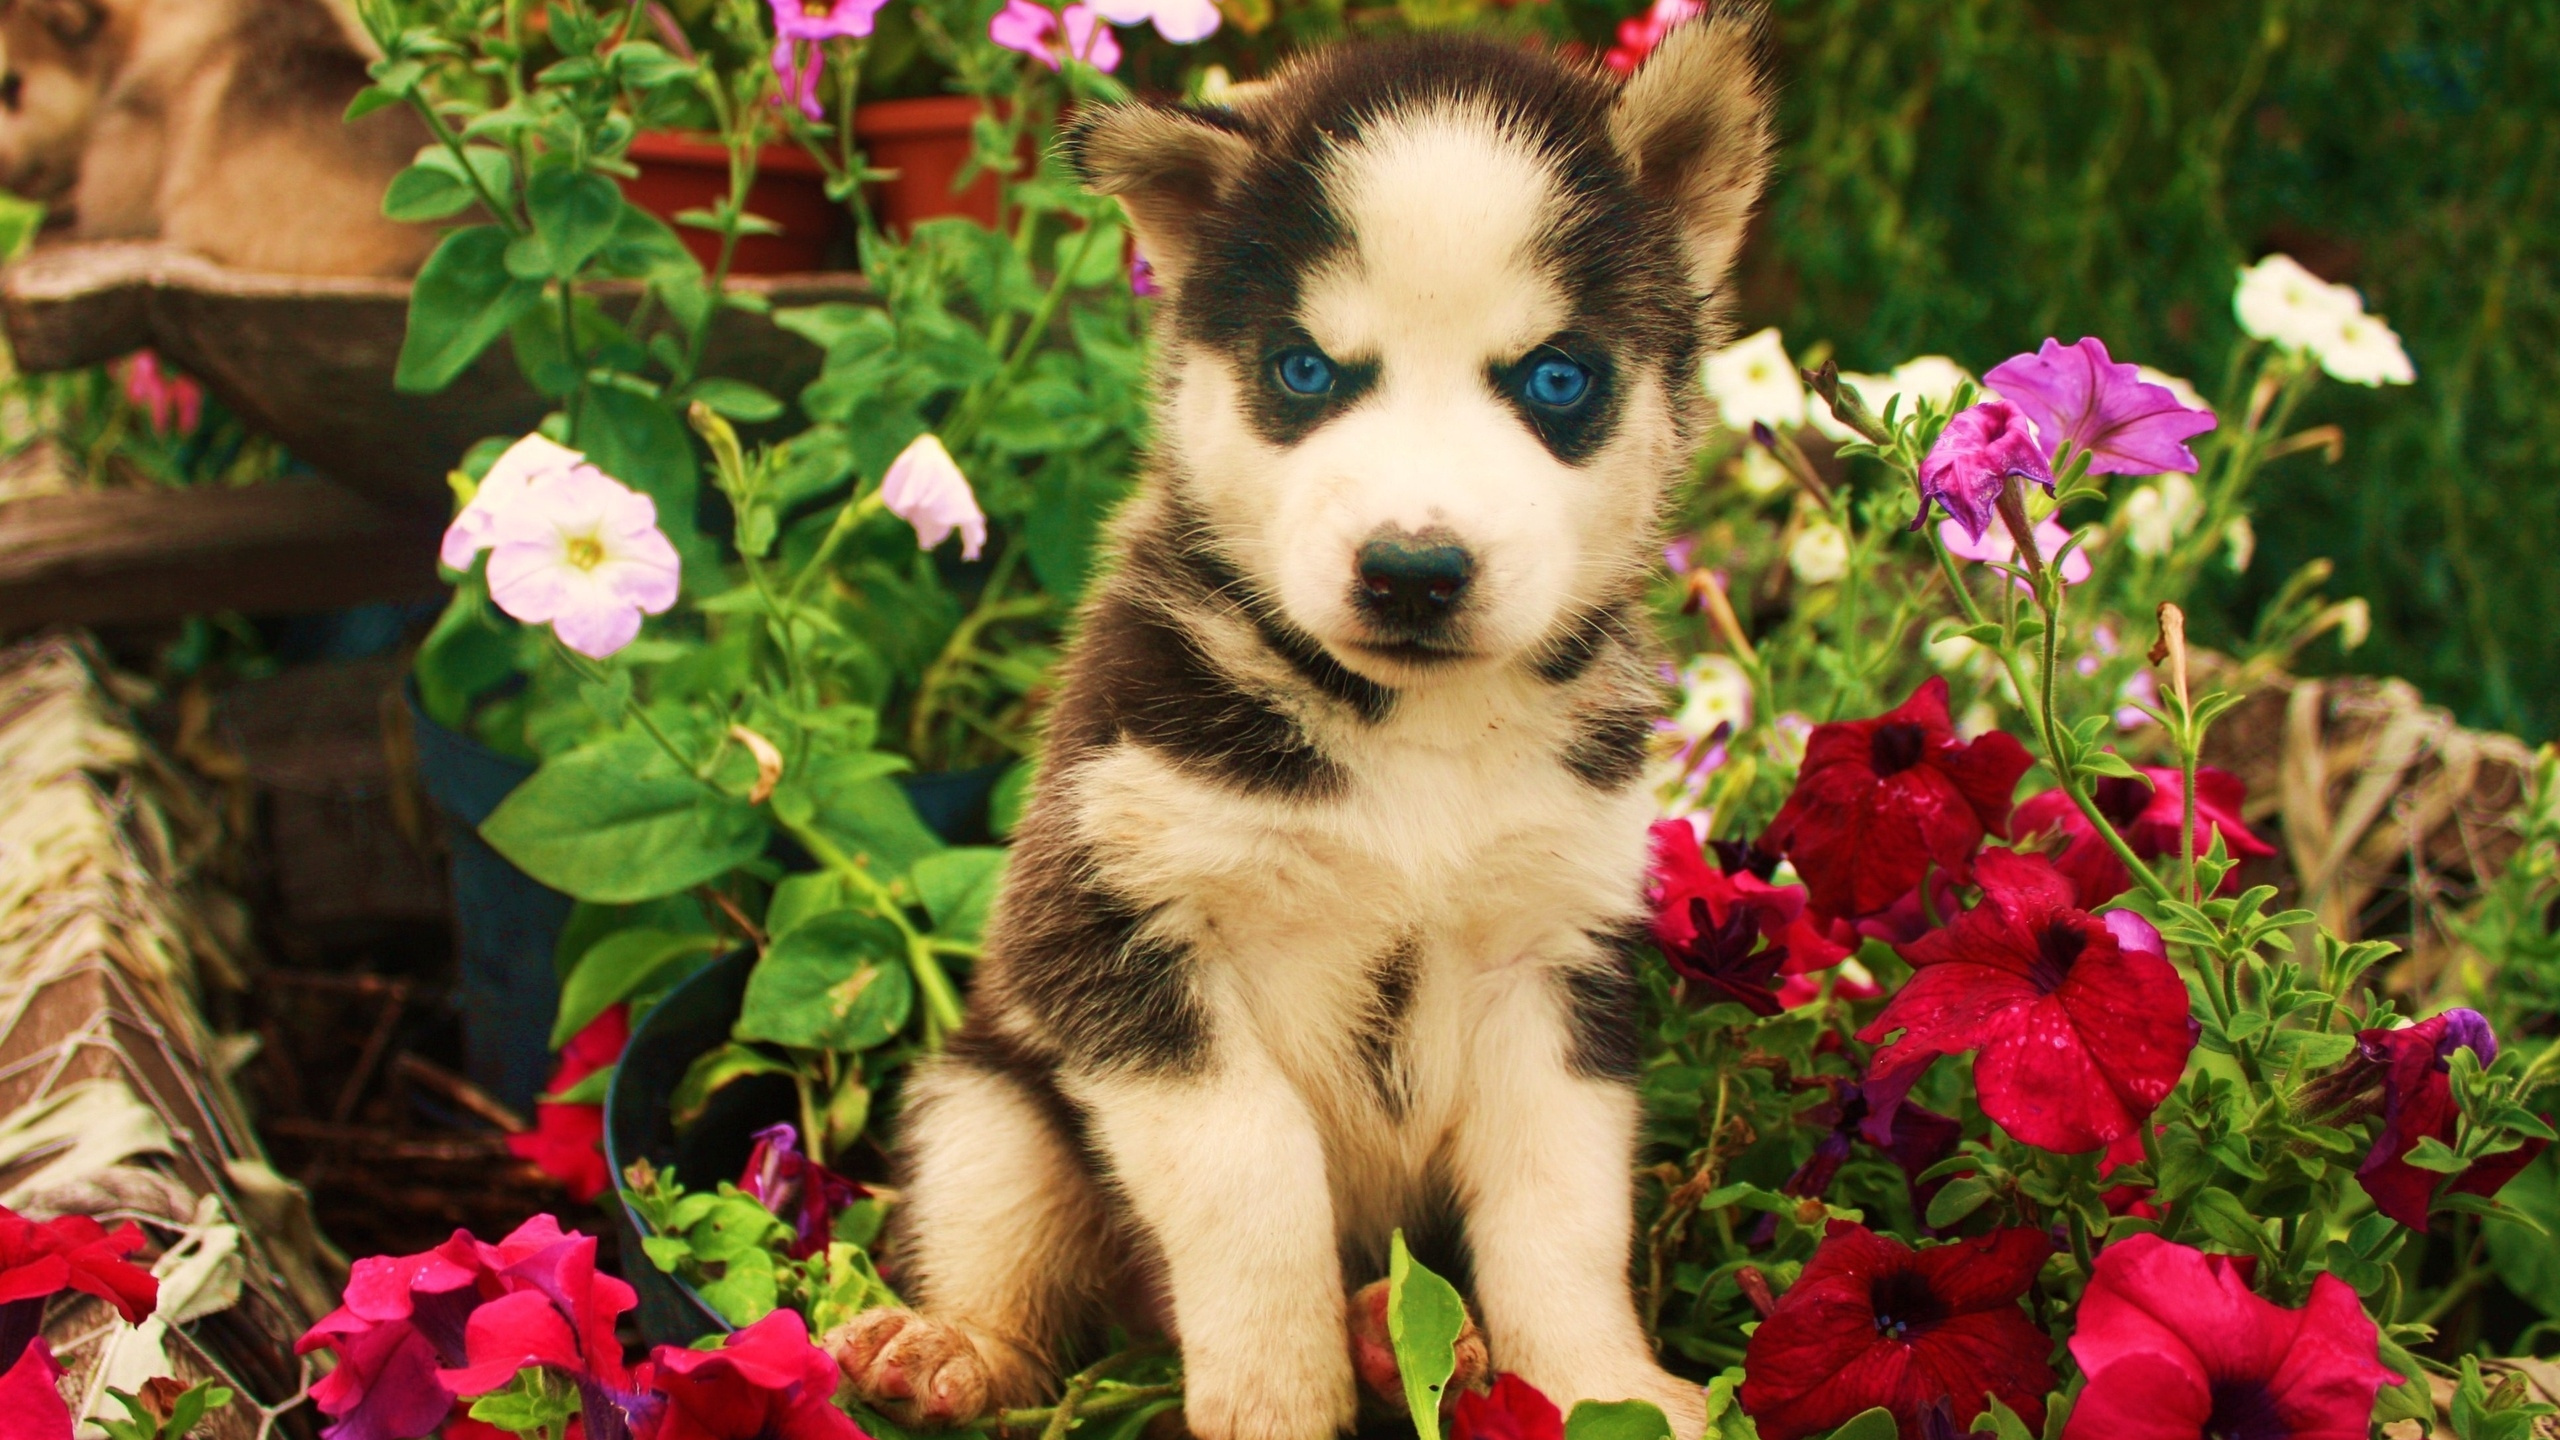 Black and White Siberian Husky Puppy Surrounded by Red Flowers. Wallpaper in 2560x1440 Resolution